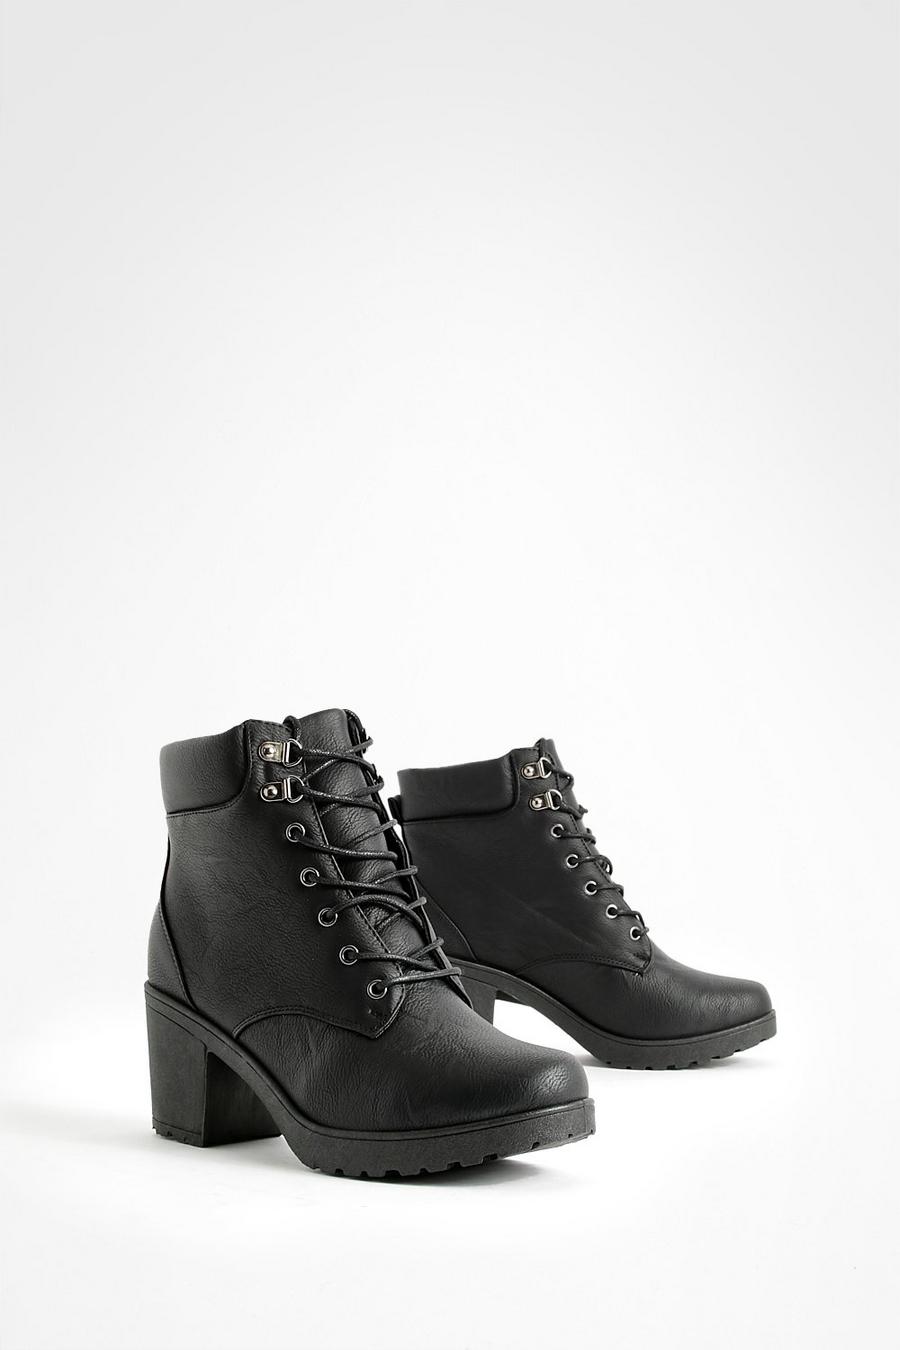 Black Wide Width Lace Up Heeled Combat Boots image number 1